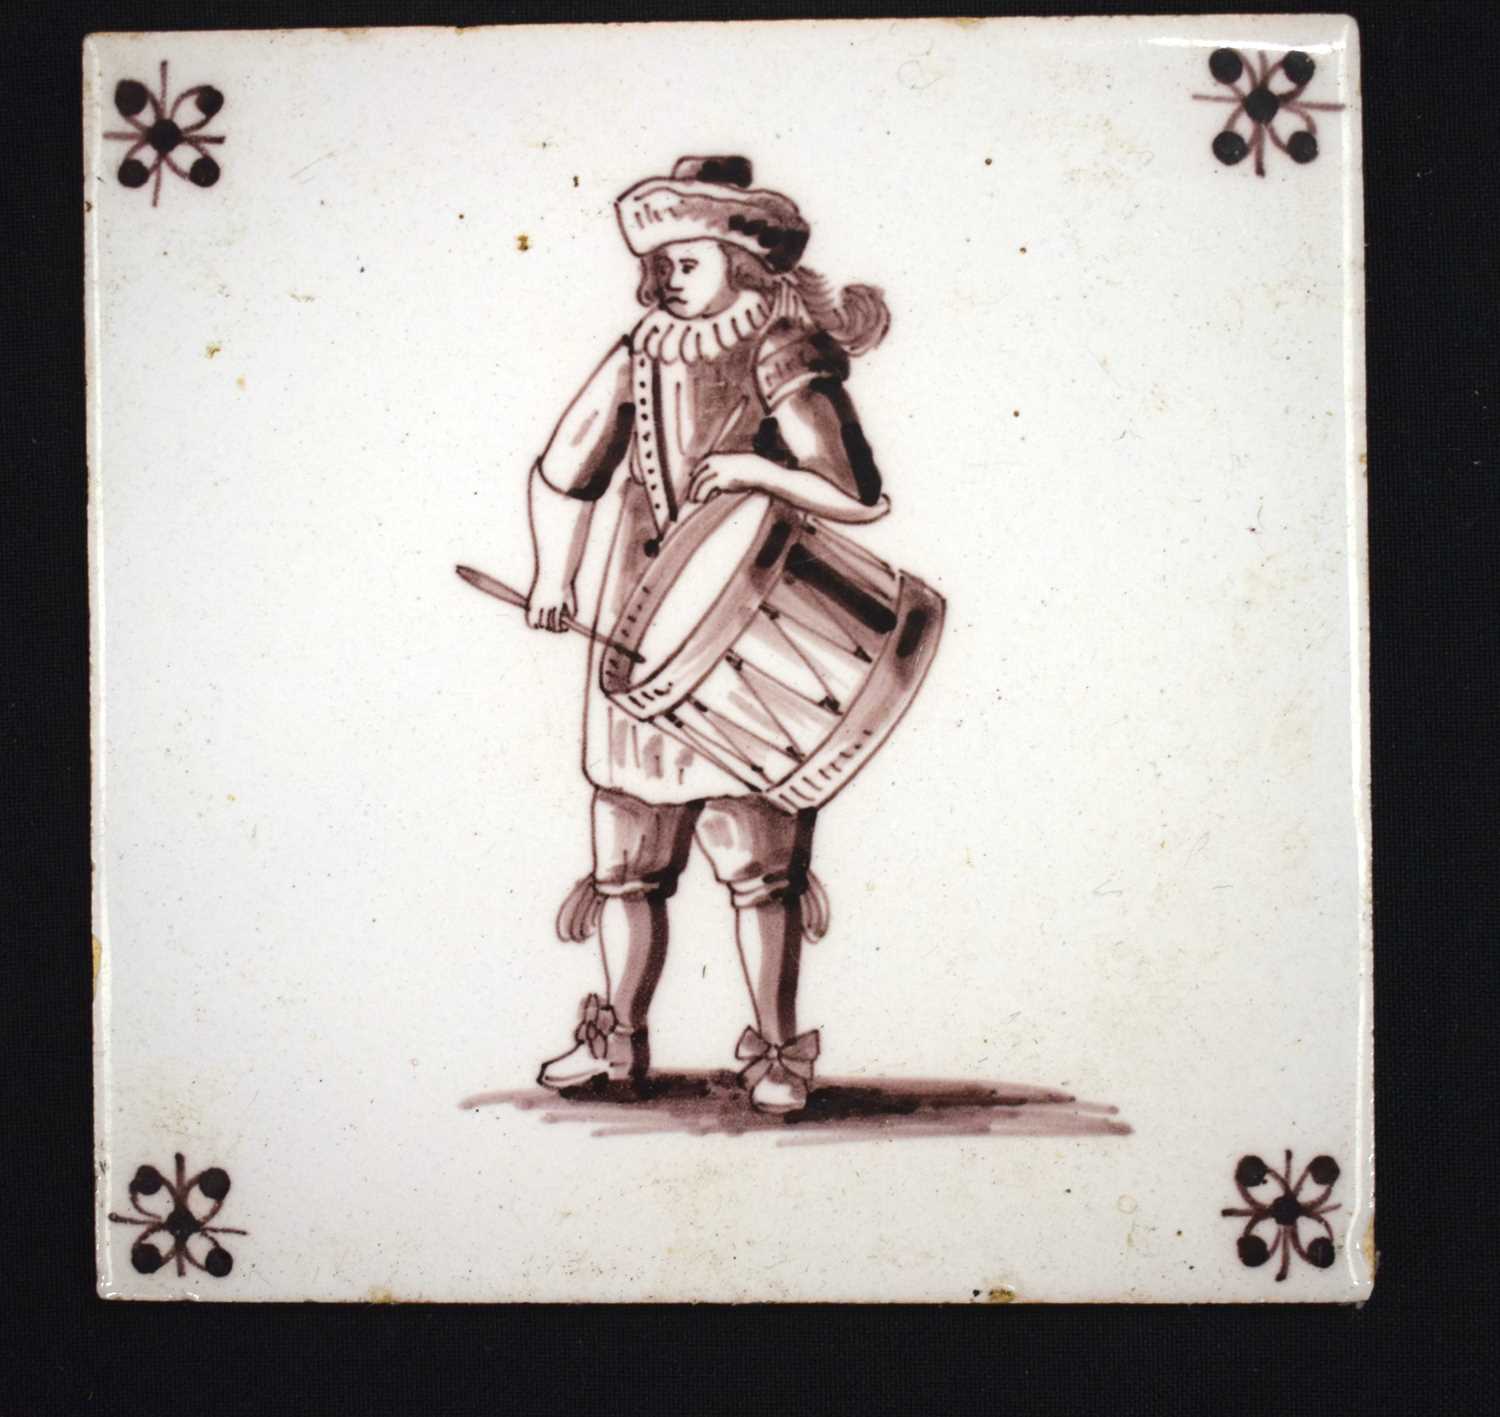 SIX DELFT POLCYRHOMED TILES. 12.5 cm square. (6) - Image 13 of 20